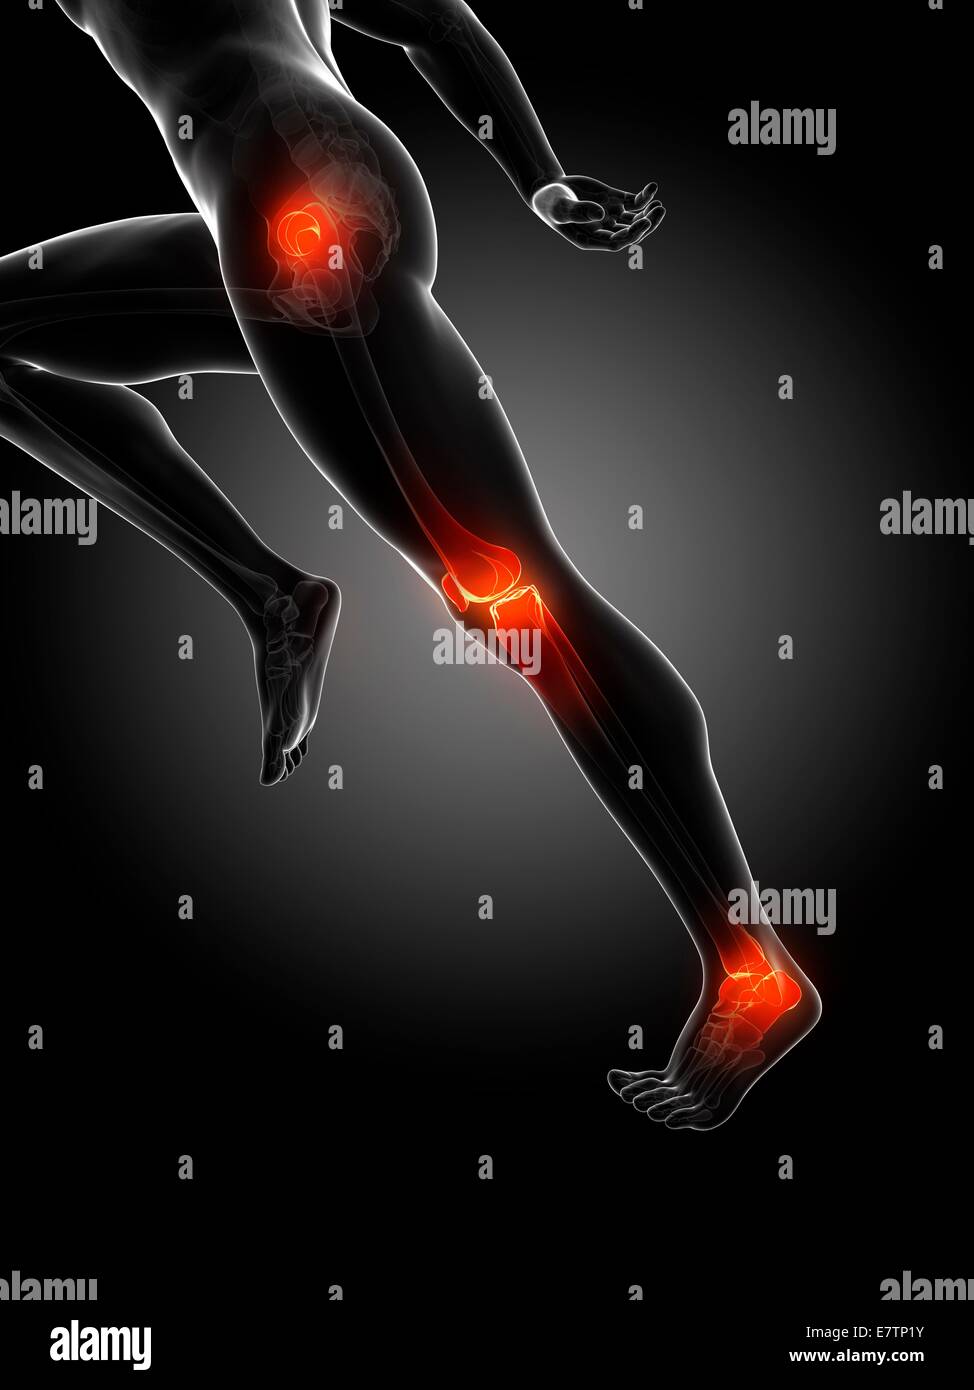 Human anatomy of a runner's joints, computer artwork. Stock Photo